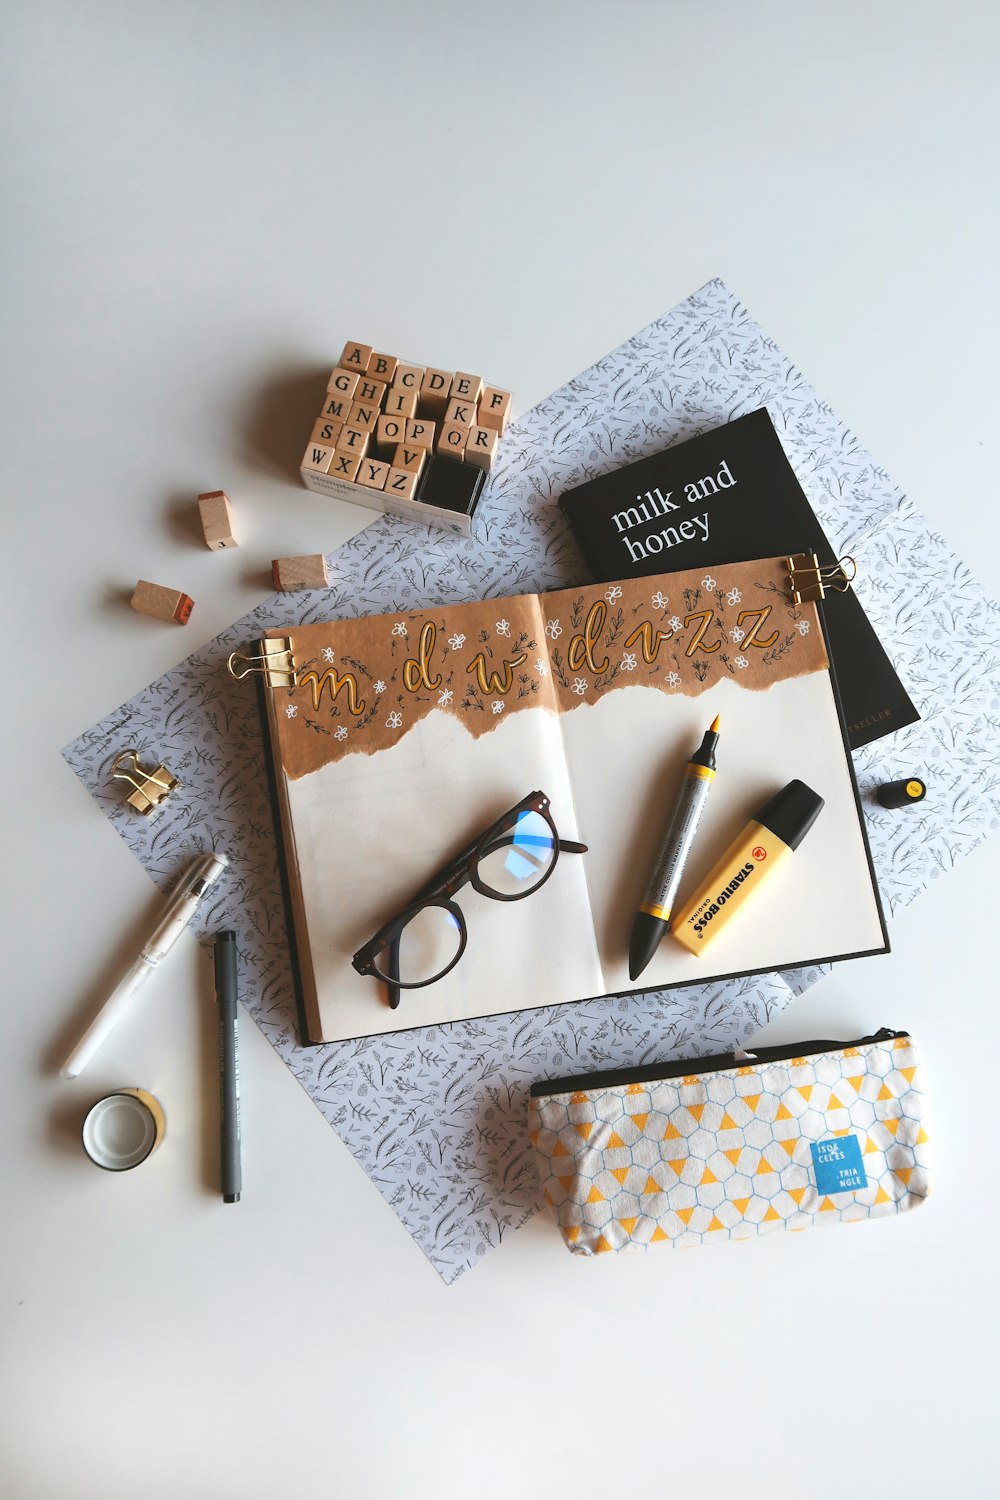 book, marker pen, and eyeglasses on white surface